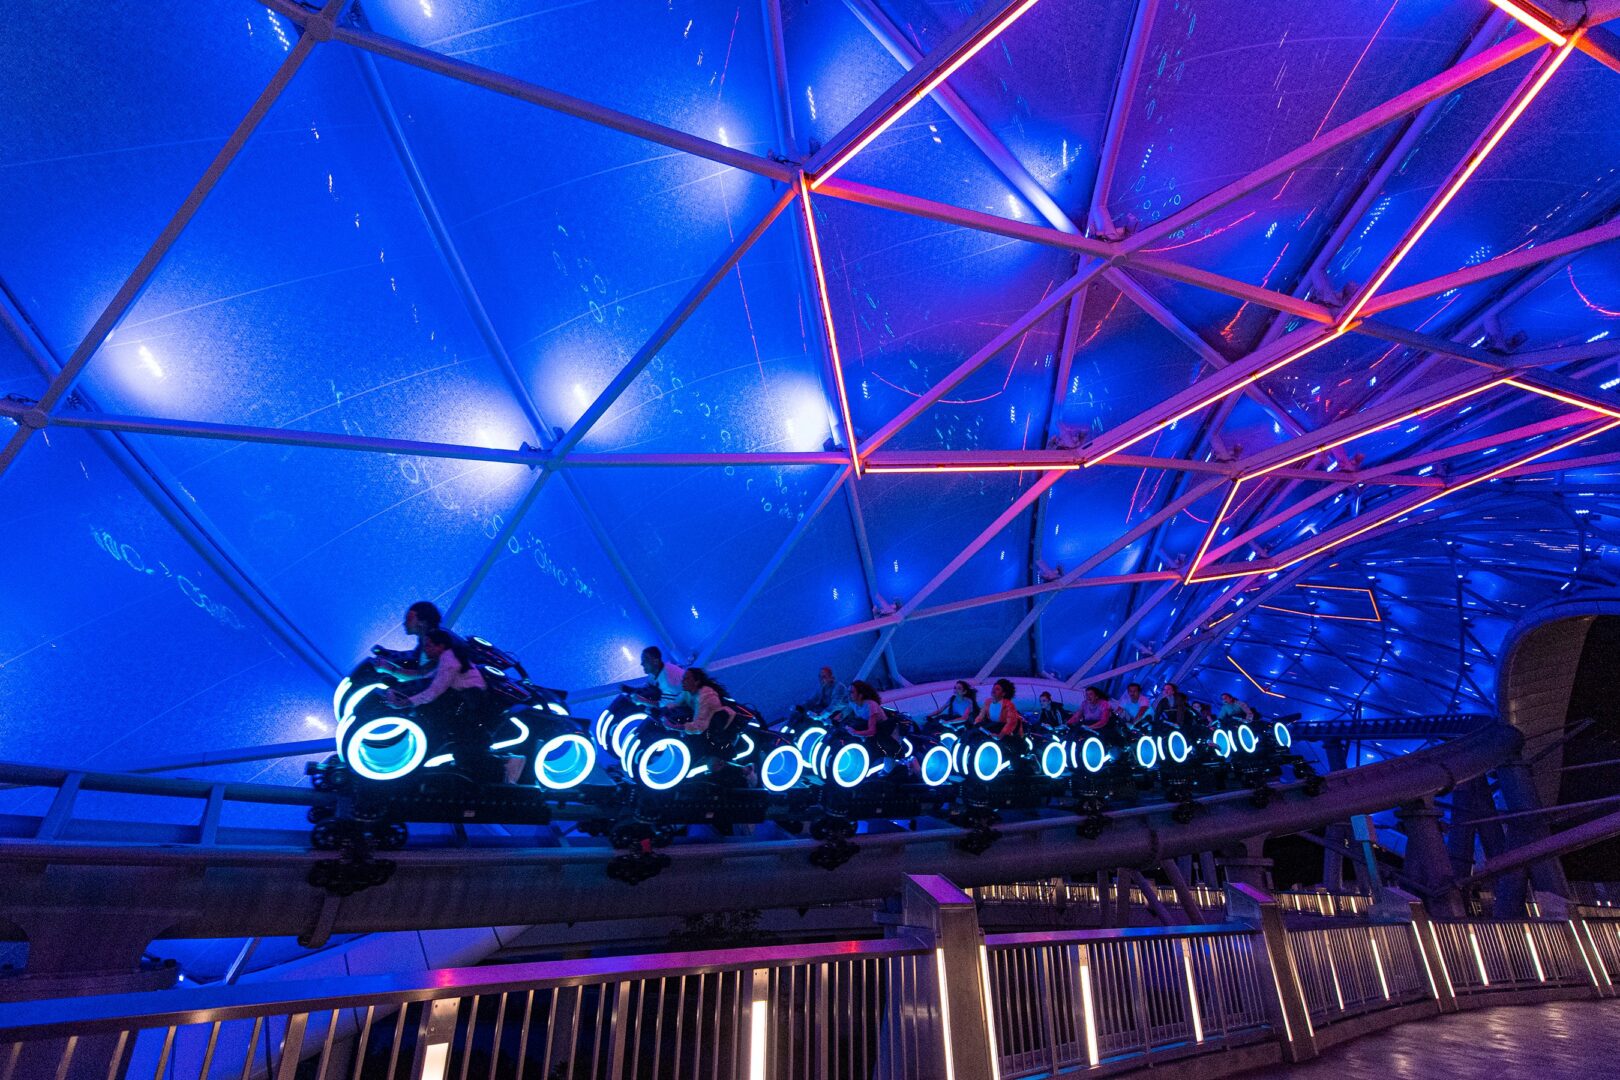 Tron Lightcycle Run Virtual Queue Gone in Seconds on Opening Day